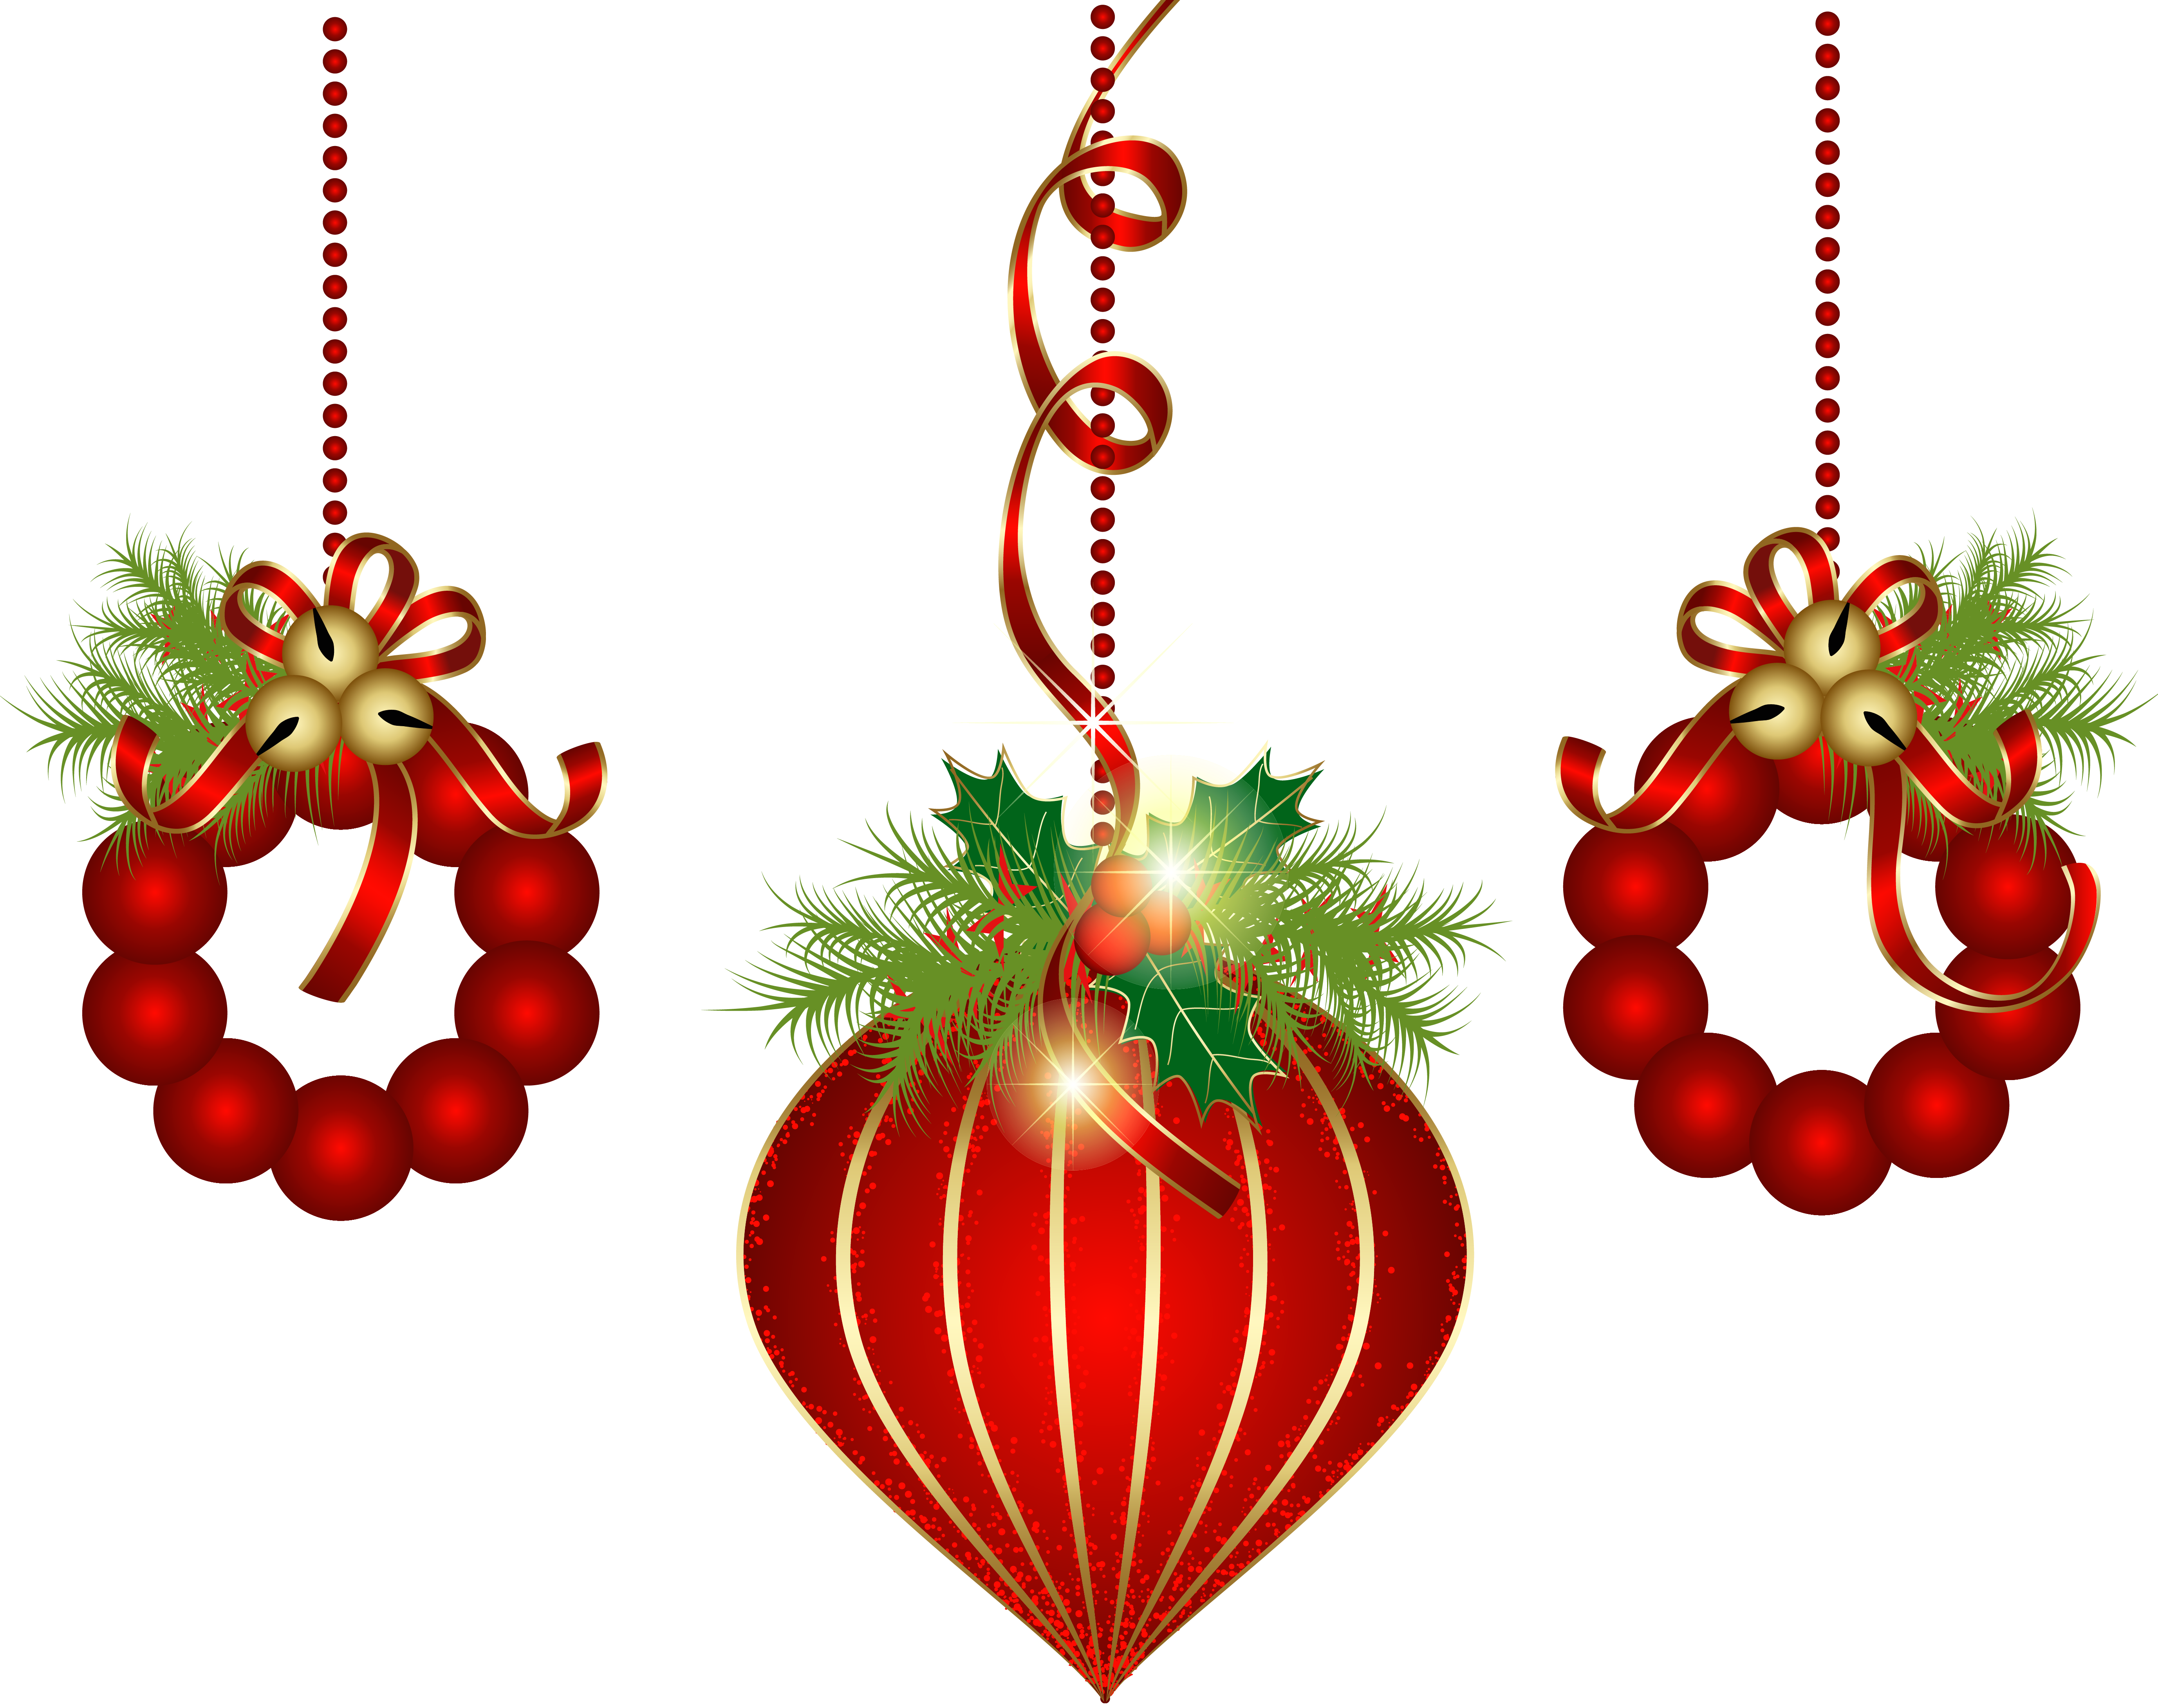 Christmas decorations clipart free.